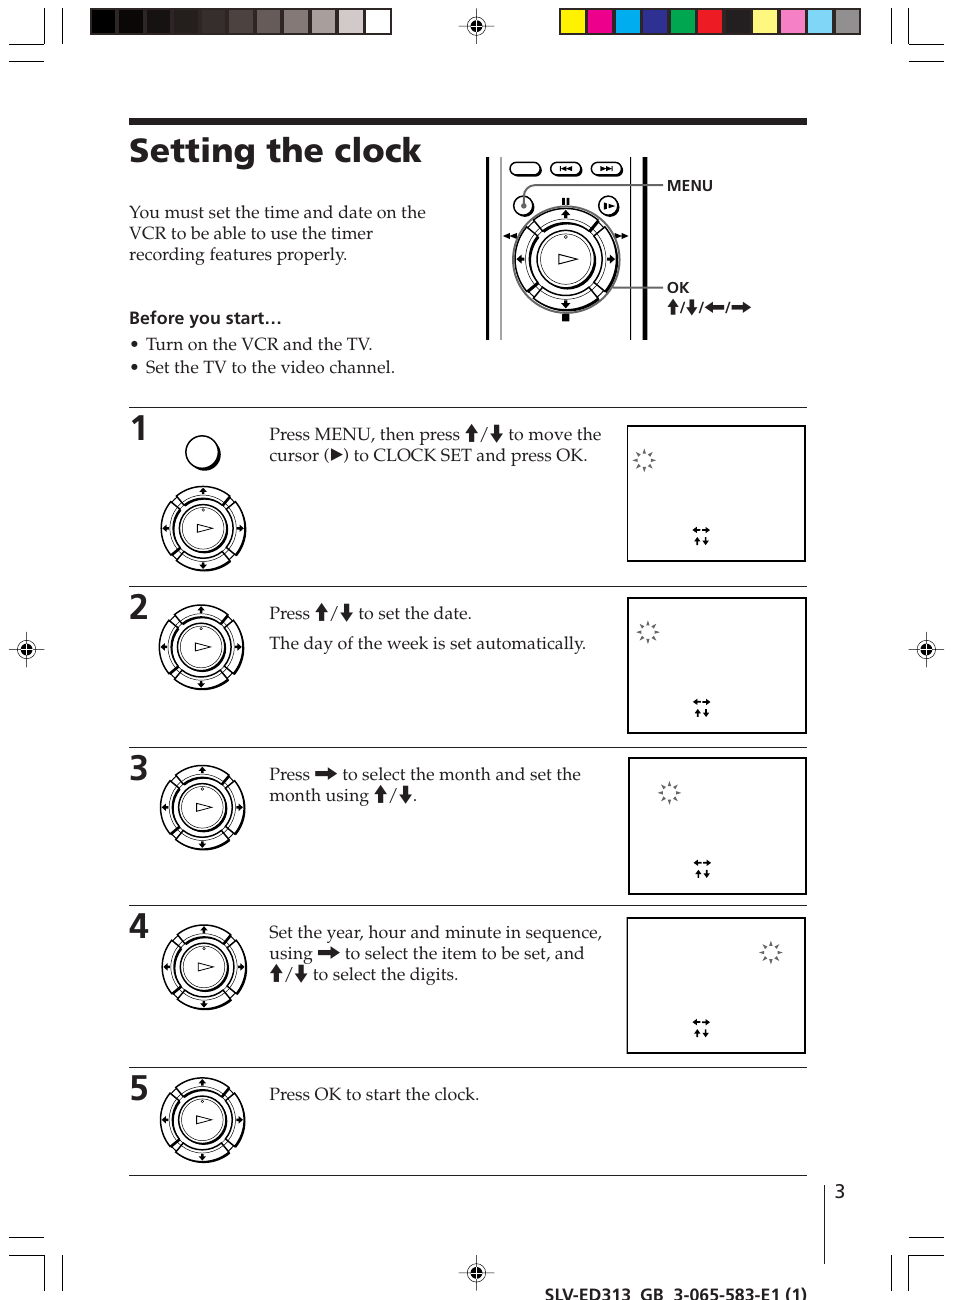 Setting the clock, Press ok to start the clock | Sony SLV-ED313 User Manual | Page 3 / 20